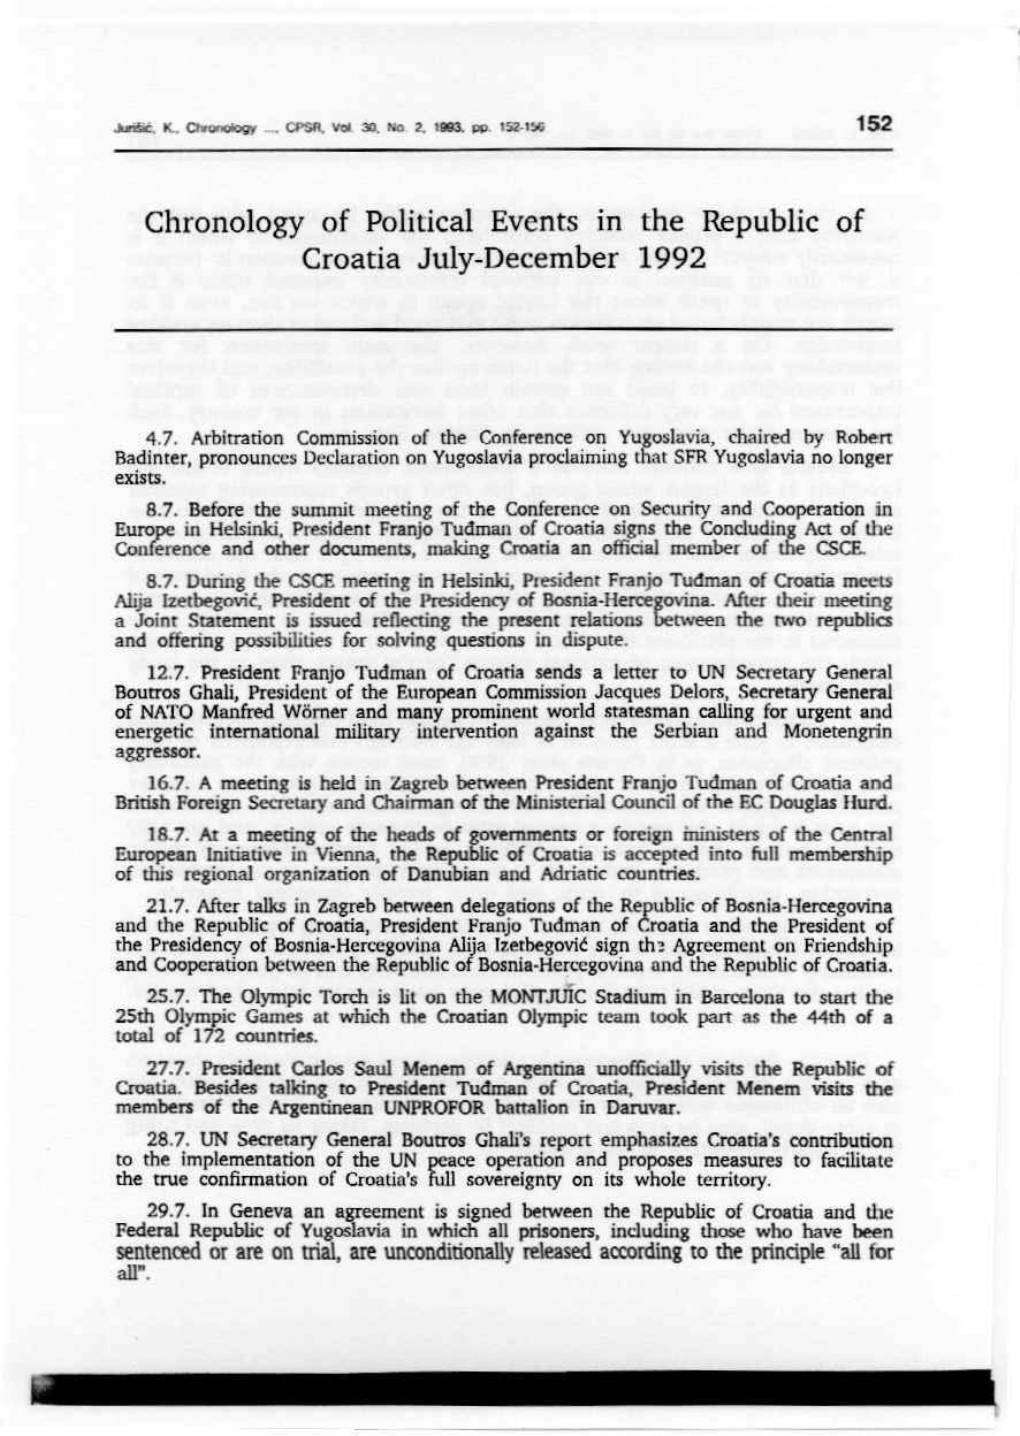 Chronology of Political Events in the Republic of Croatia July-December 1992